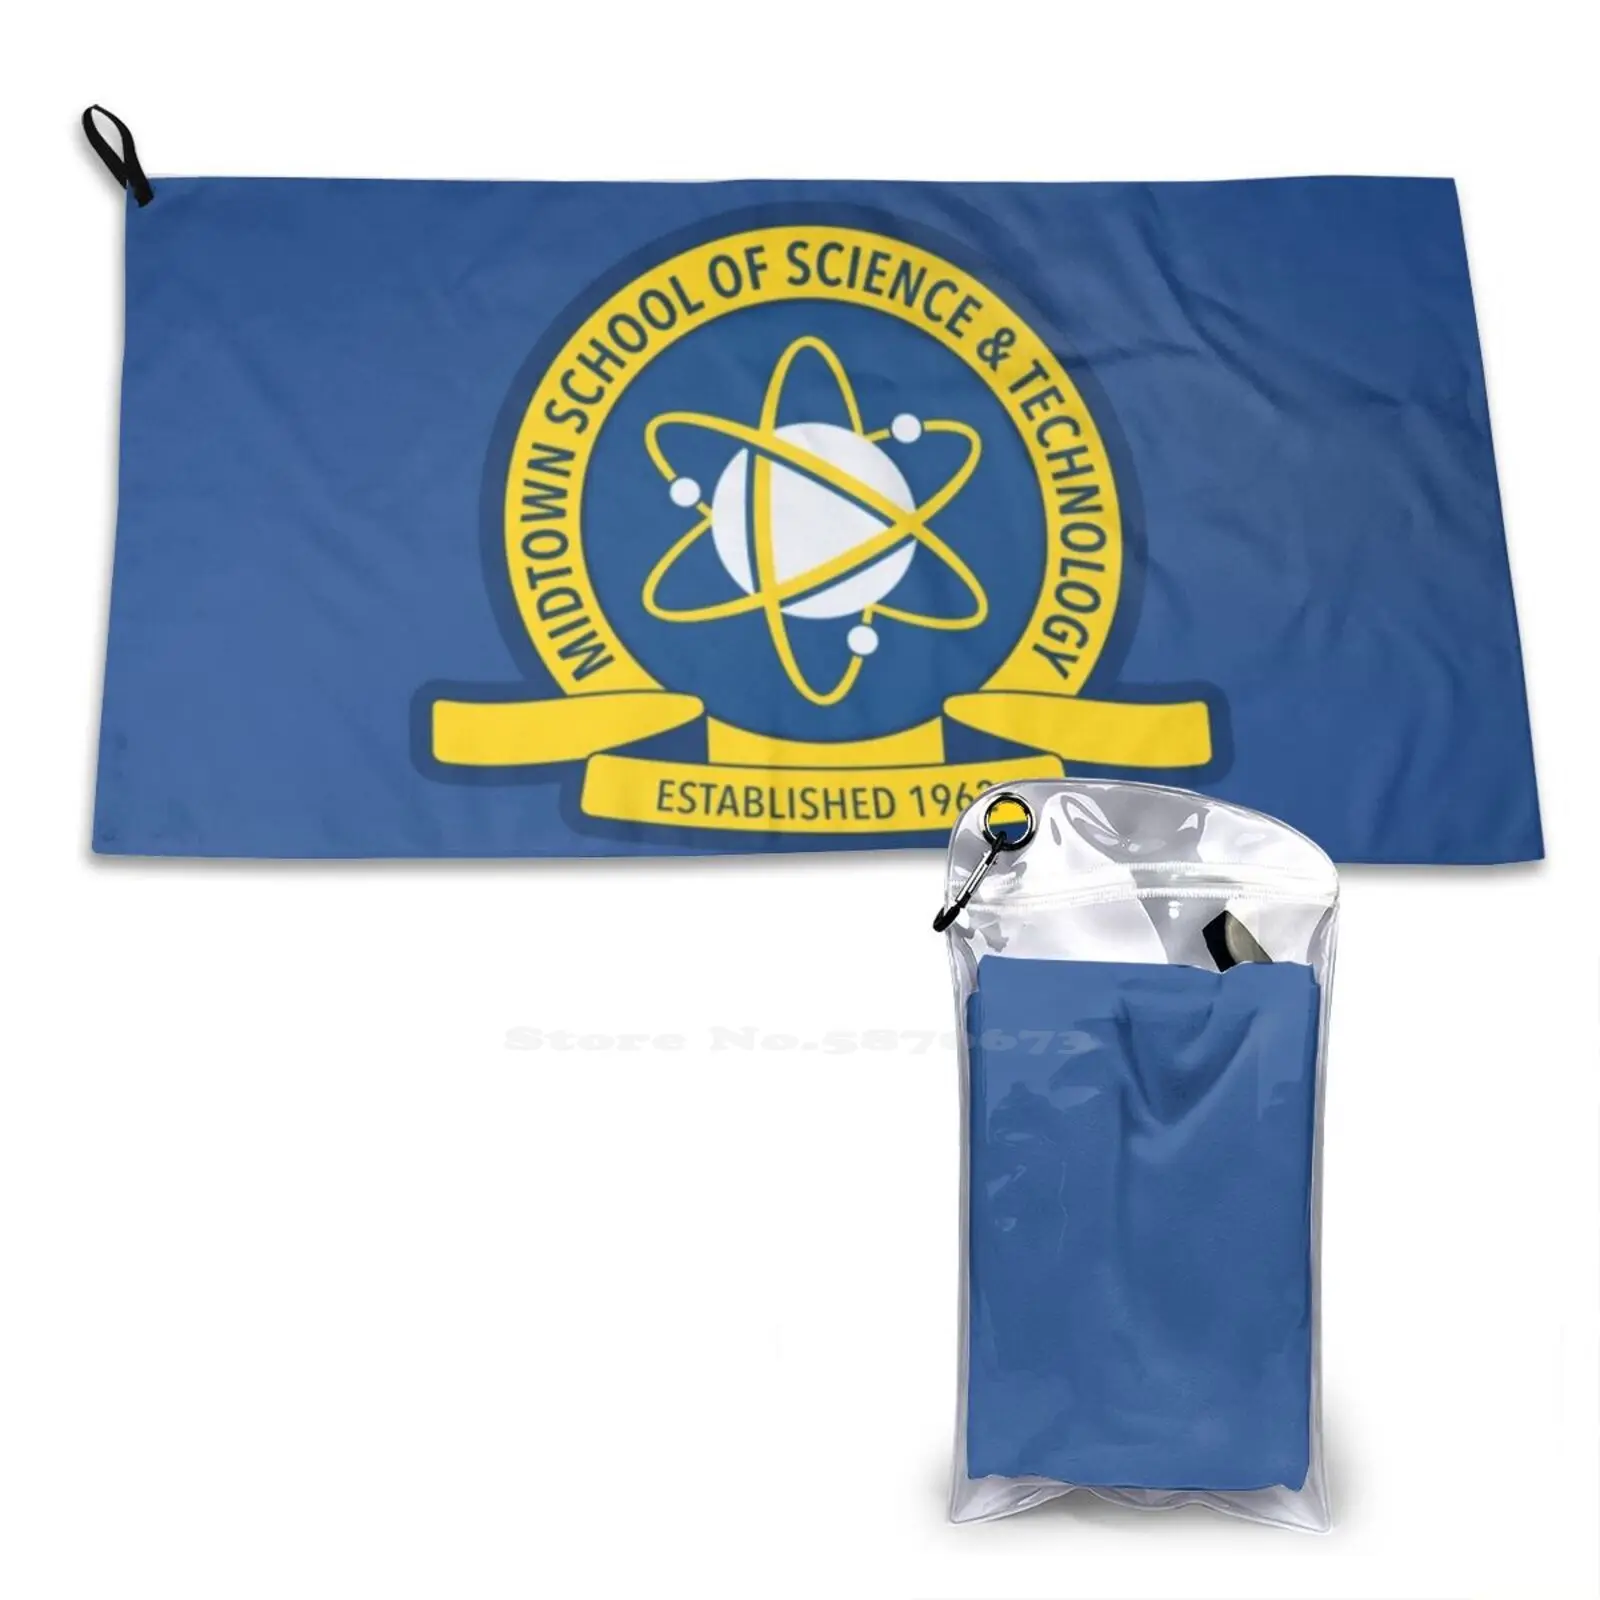 

Midtown School Of Science And Technology Emblem Soft Towel Quick Dry Sport Beach Towel Midtown School Of Science And Technology